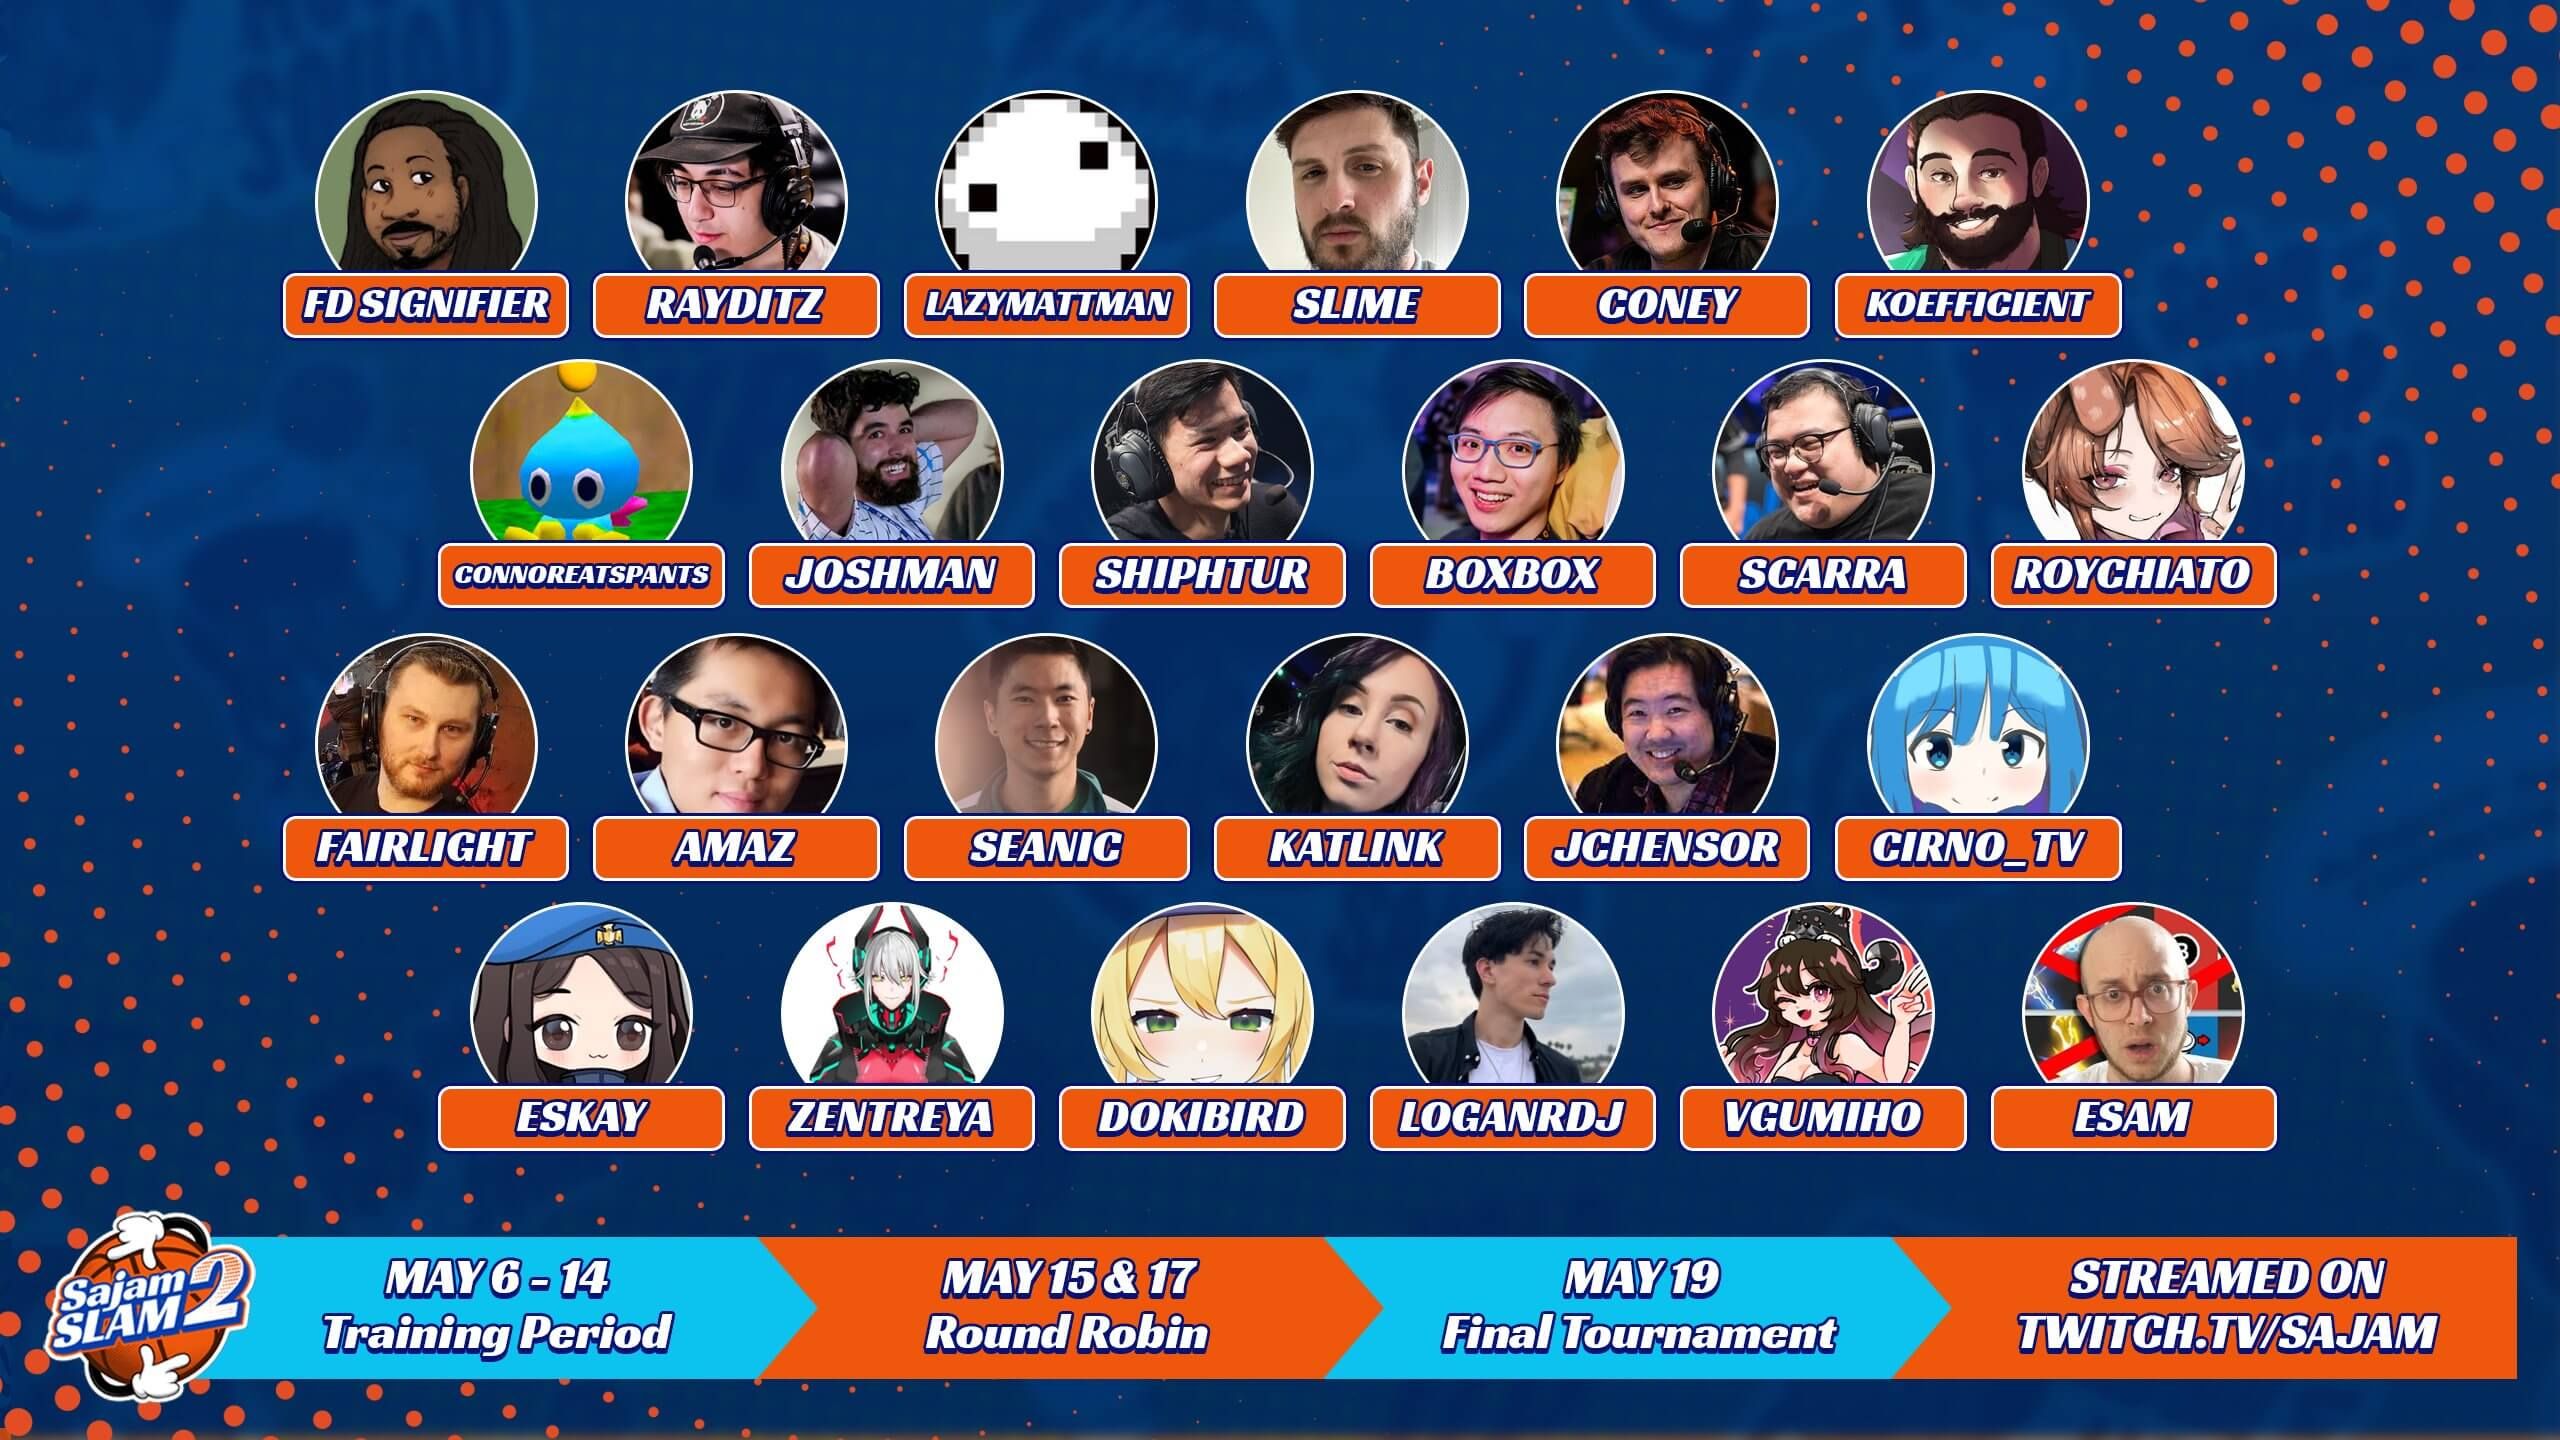 Players and Coaches For Sajam's Slam Announced